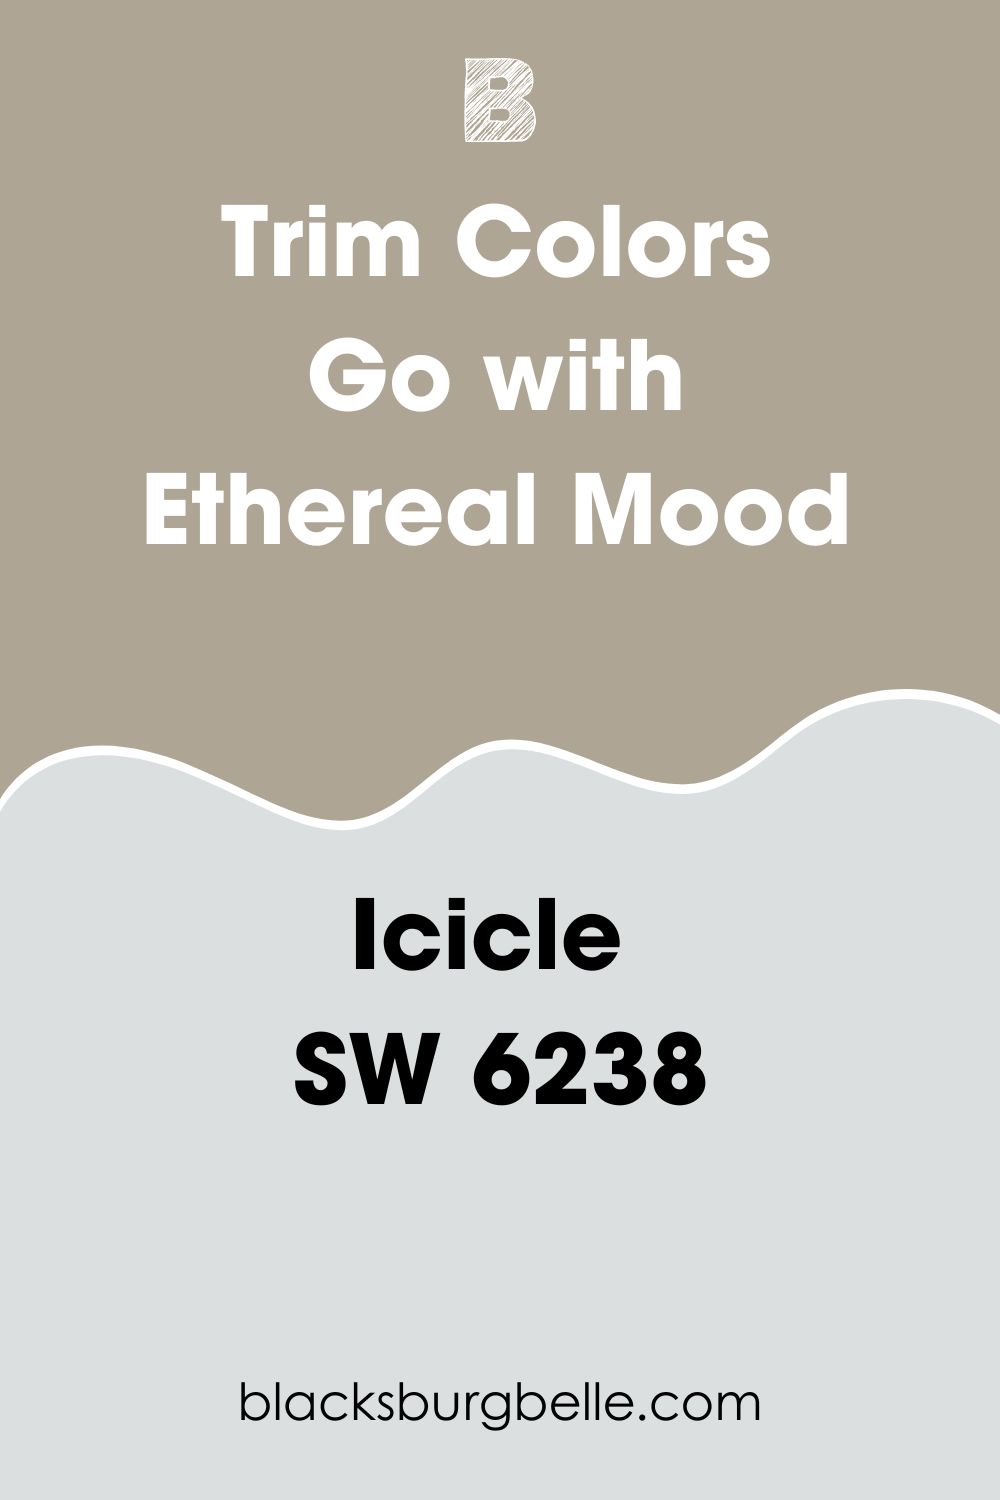 Sherwin Williams Icicle SW 6238 Work with Sherwin Williams Ethereal Mood